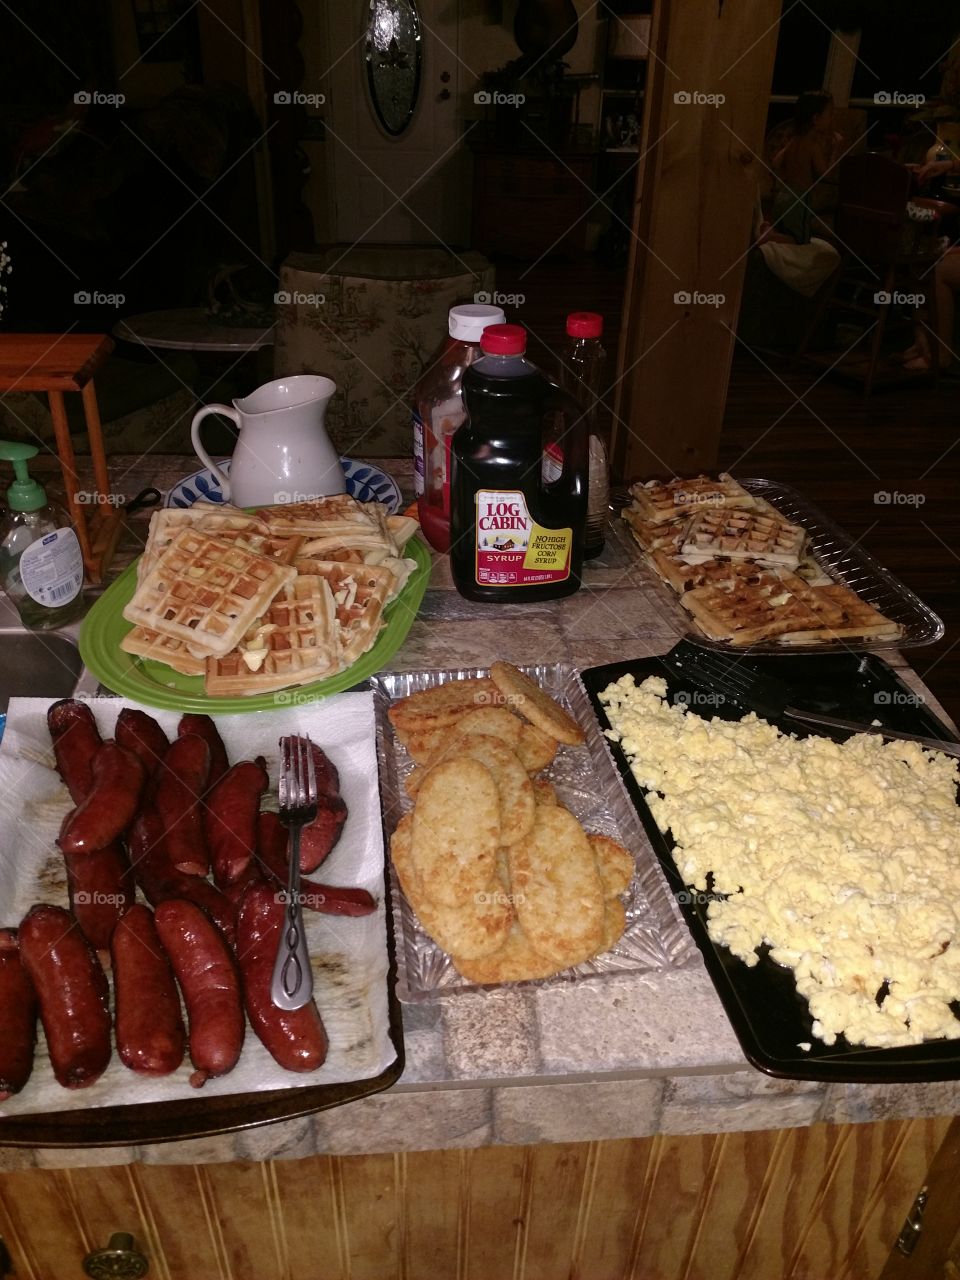 breakfast for dinner, that's how we do it down south in Georgia